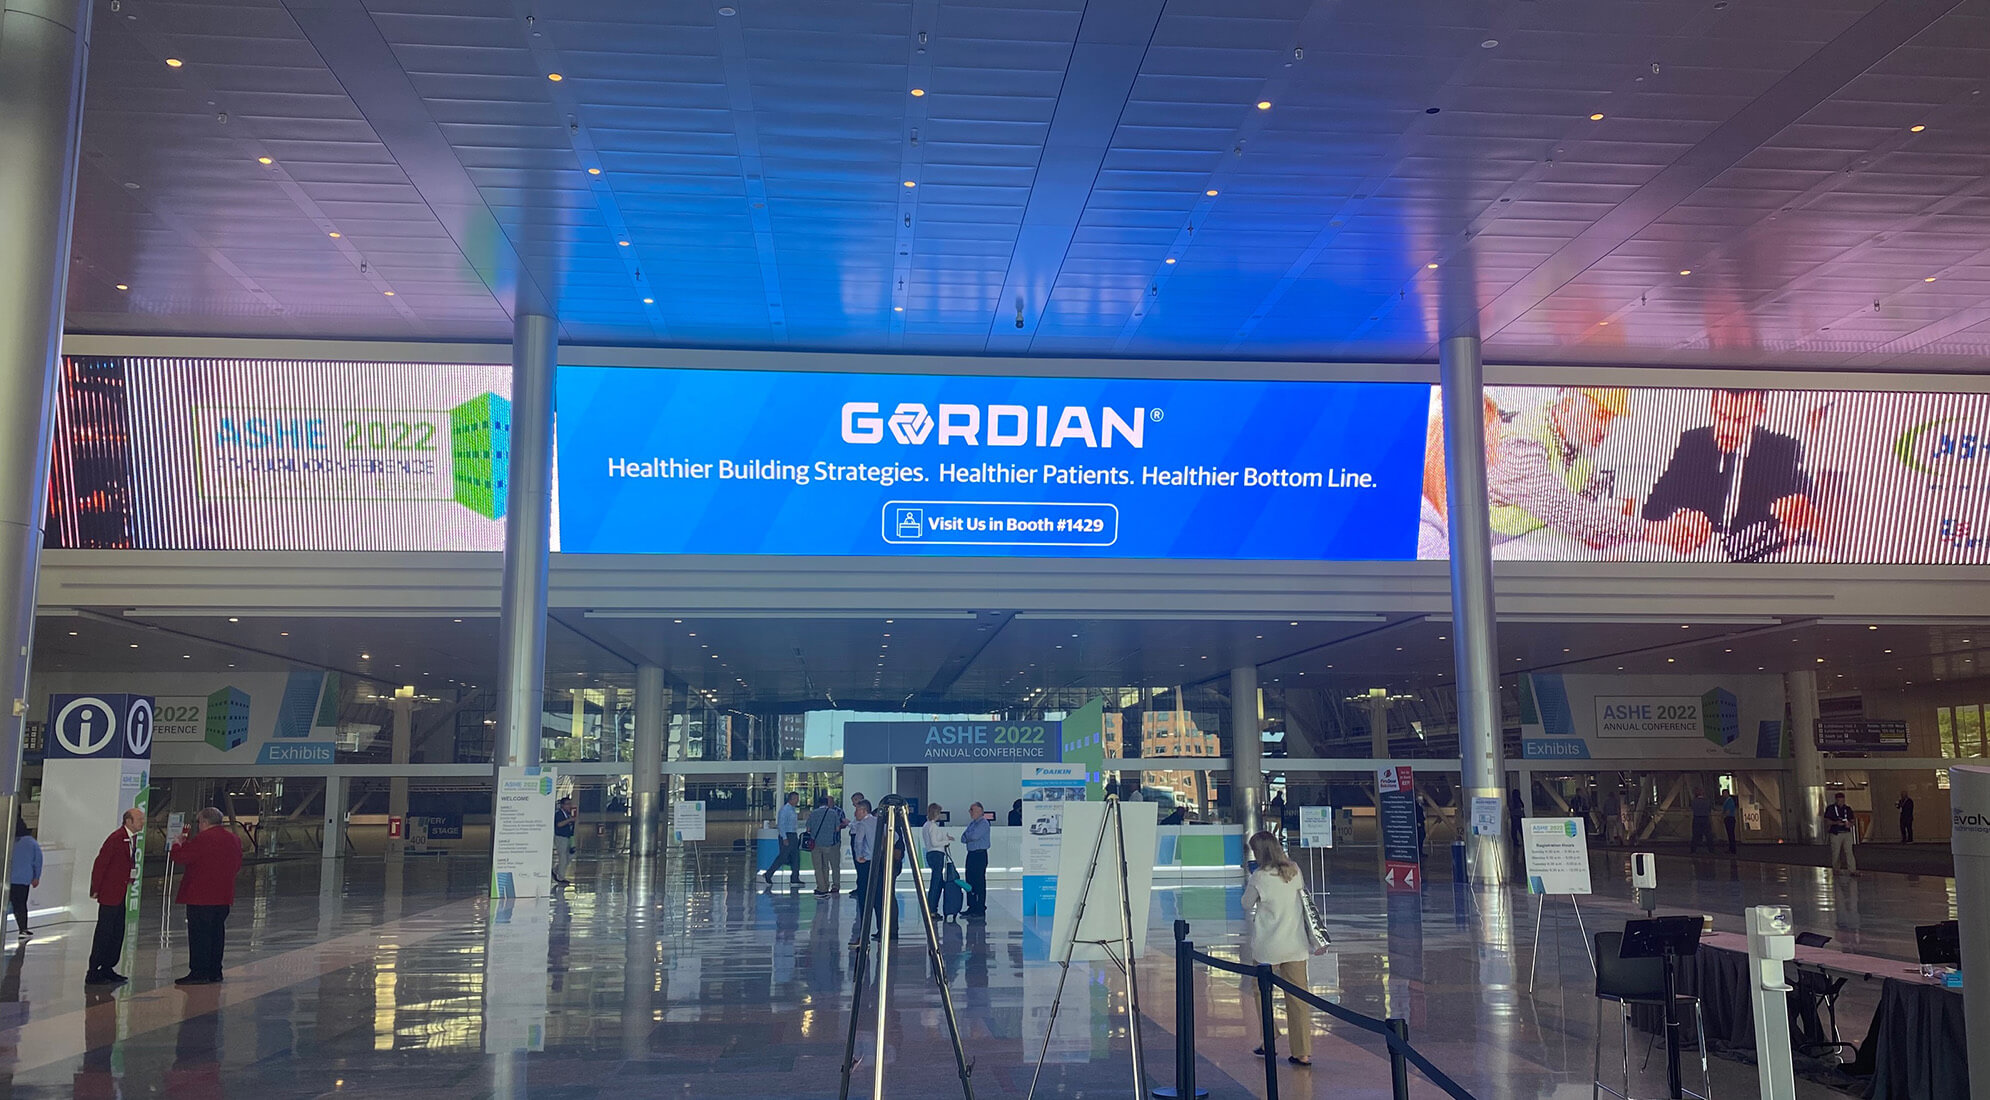 Gordian made a splash at the 2022 ASHE Annual Conference.